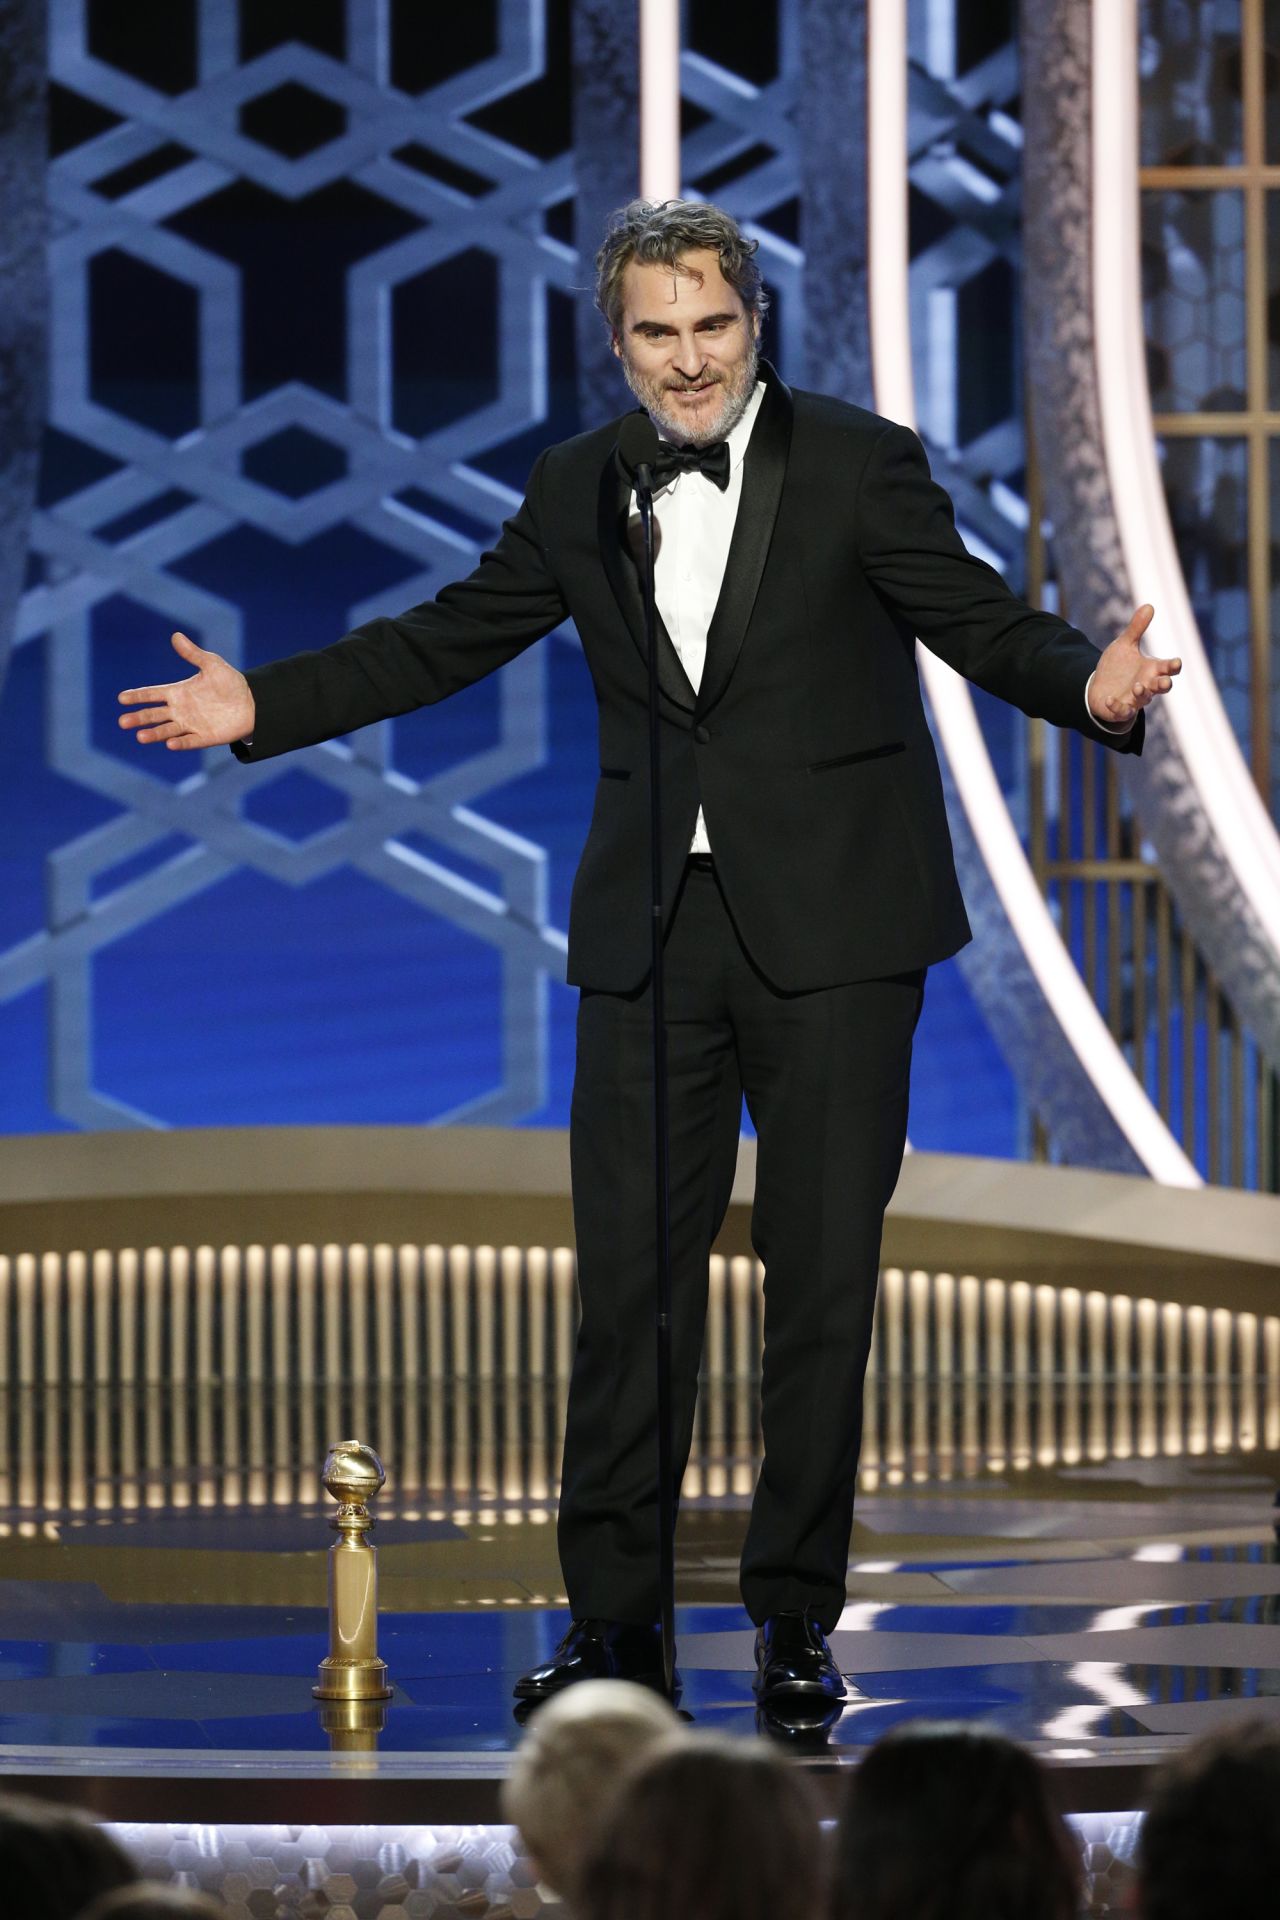 See this tux? You'll be seeing a lot more of it, if you keep up with award shows. Joaquin Phoenix plans to wear it to every ceremony he attends to cut back on textile waste.